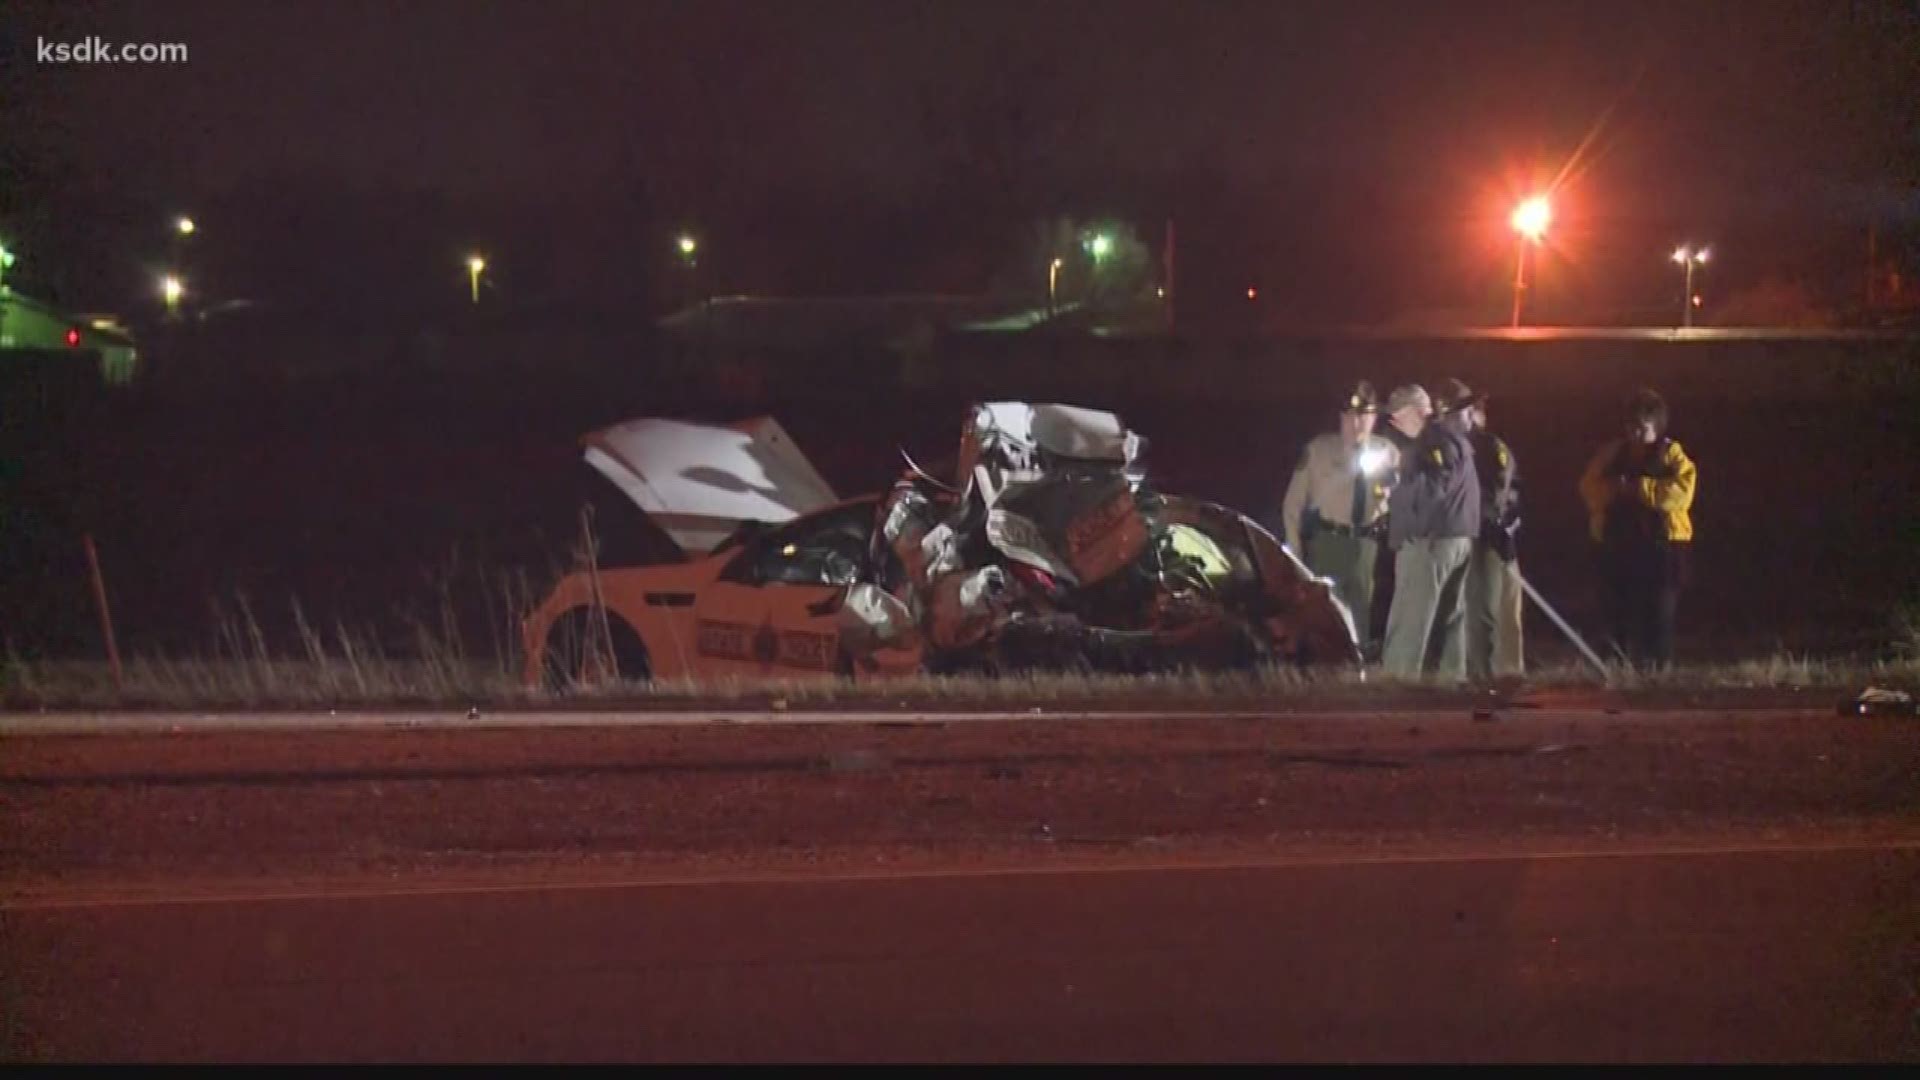 An Illinois State Trooper is lucky to be alive after he and his car were hit by a semi on I-55 in Collinsville.